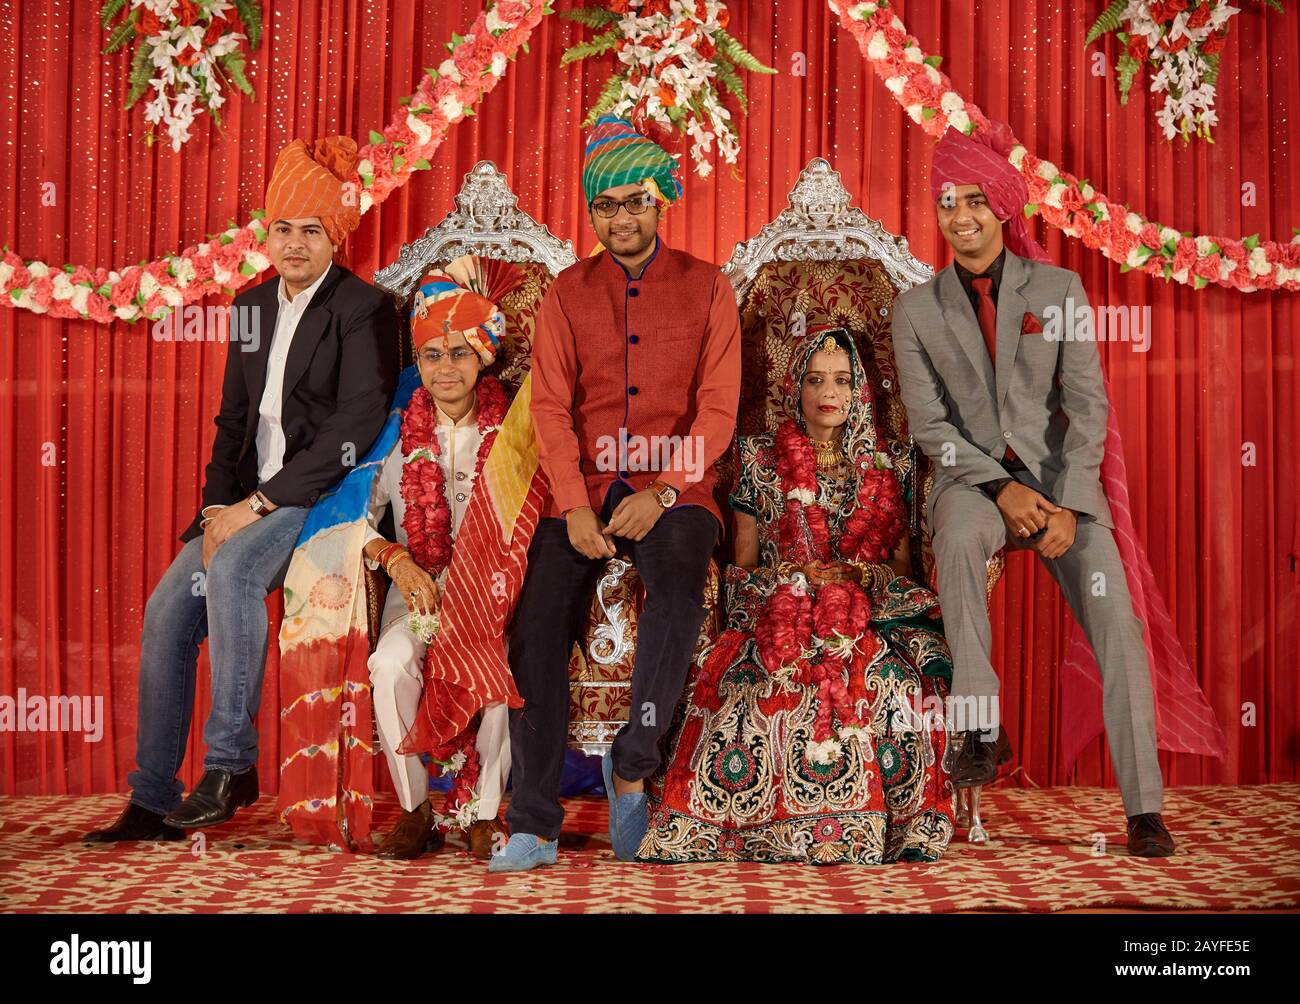 bridal couple with guests on traditional Indian wedding, Jodhpur ...